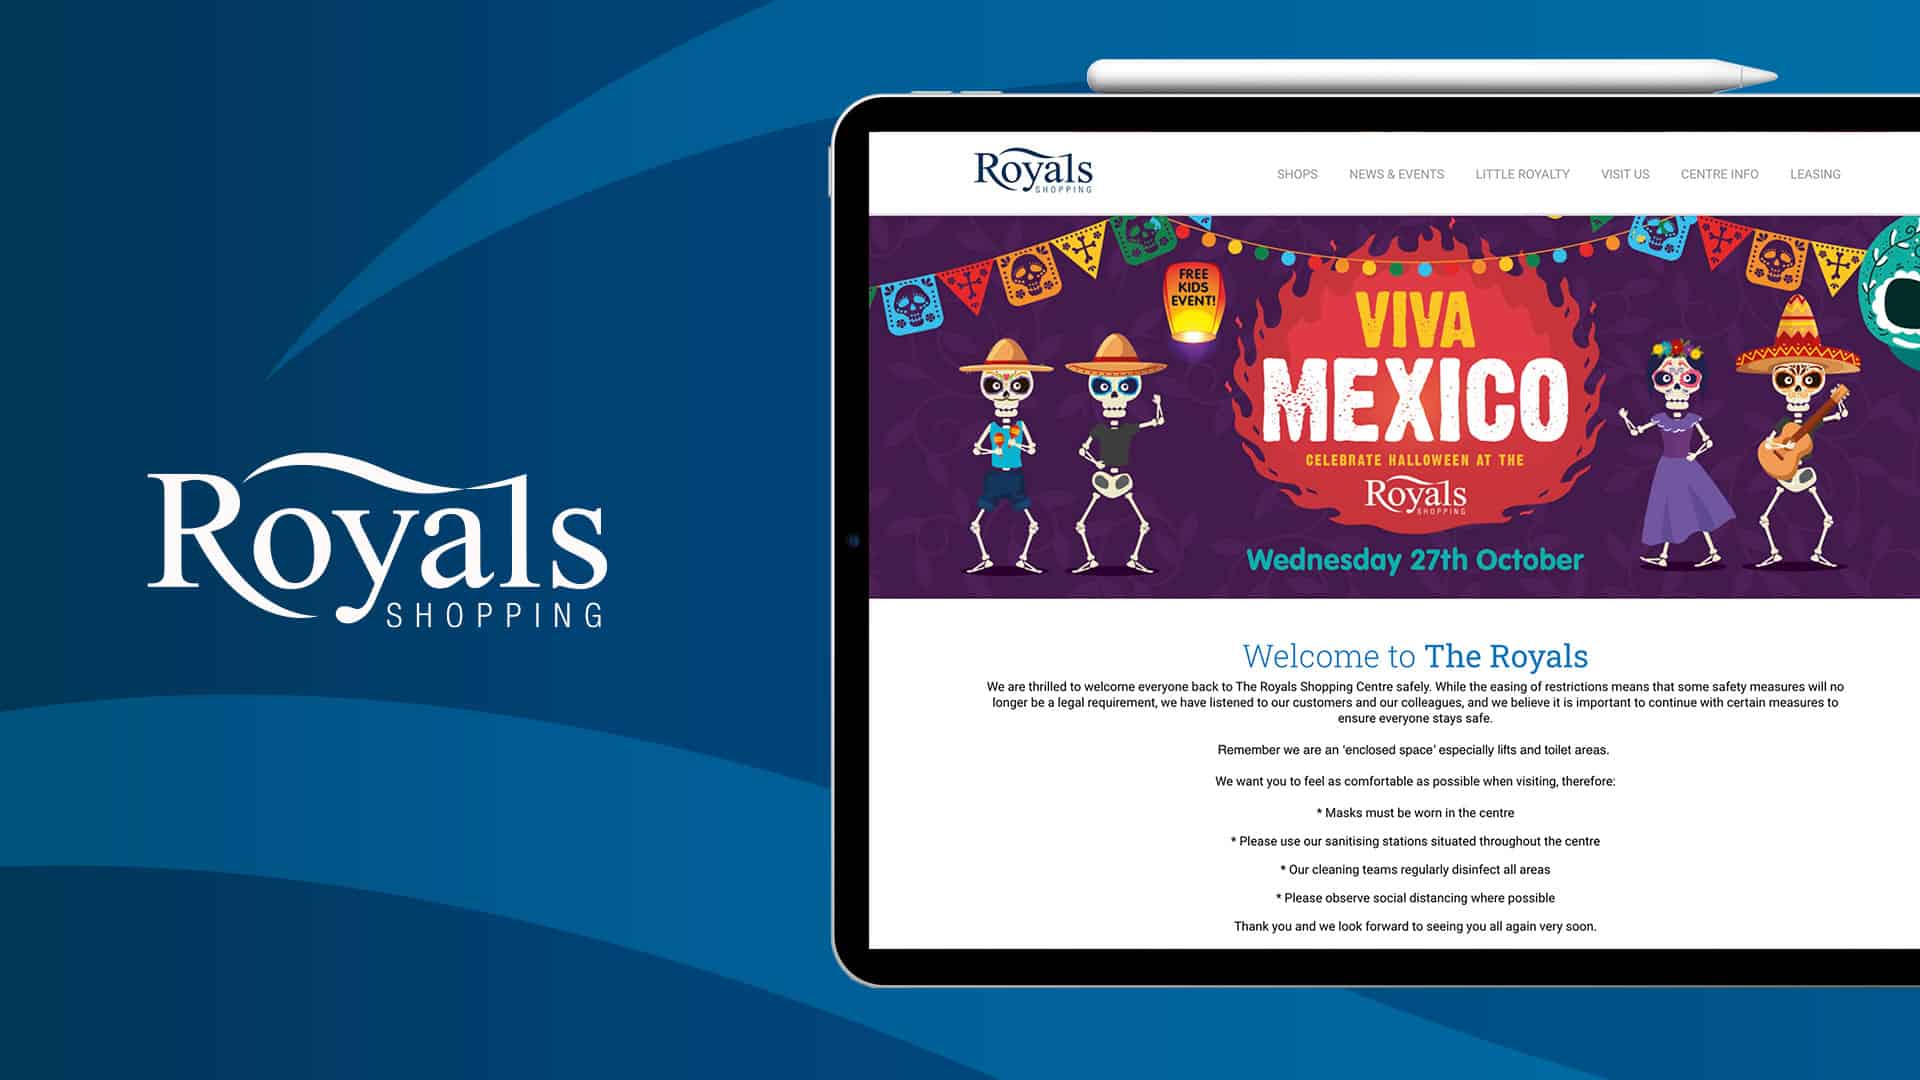 Landing pages designed by web design agency Swan Creative for Southend shopping centre, The Royals